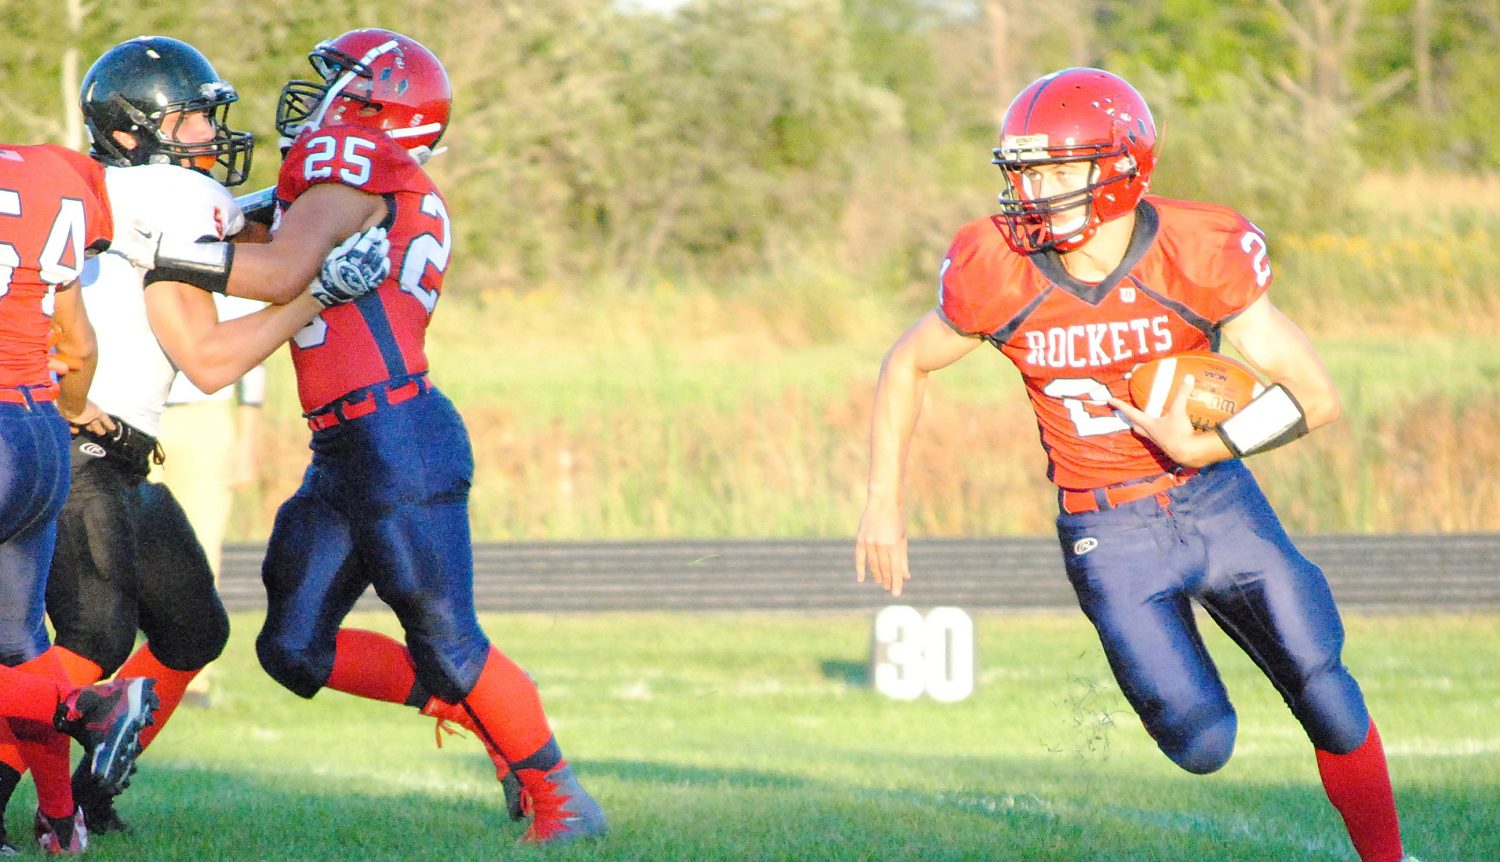 Spencer/Columbus running back Noah Zastrow, right, has scored a team-high 22 touchdowns this season. The Rockets host Bonduel in a WIAA Division 5 Level 1 playoff game Friday at Spencer High School.